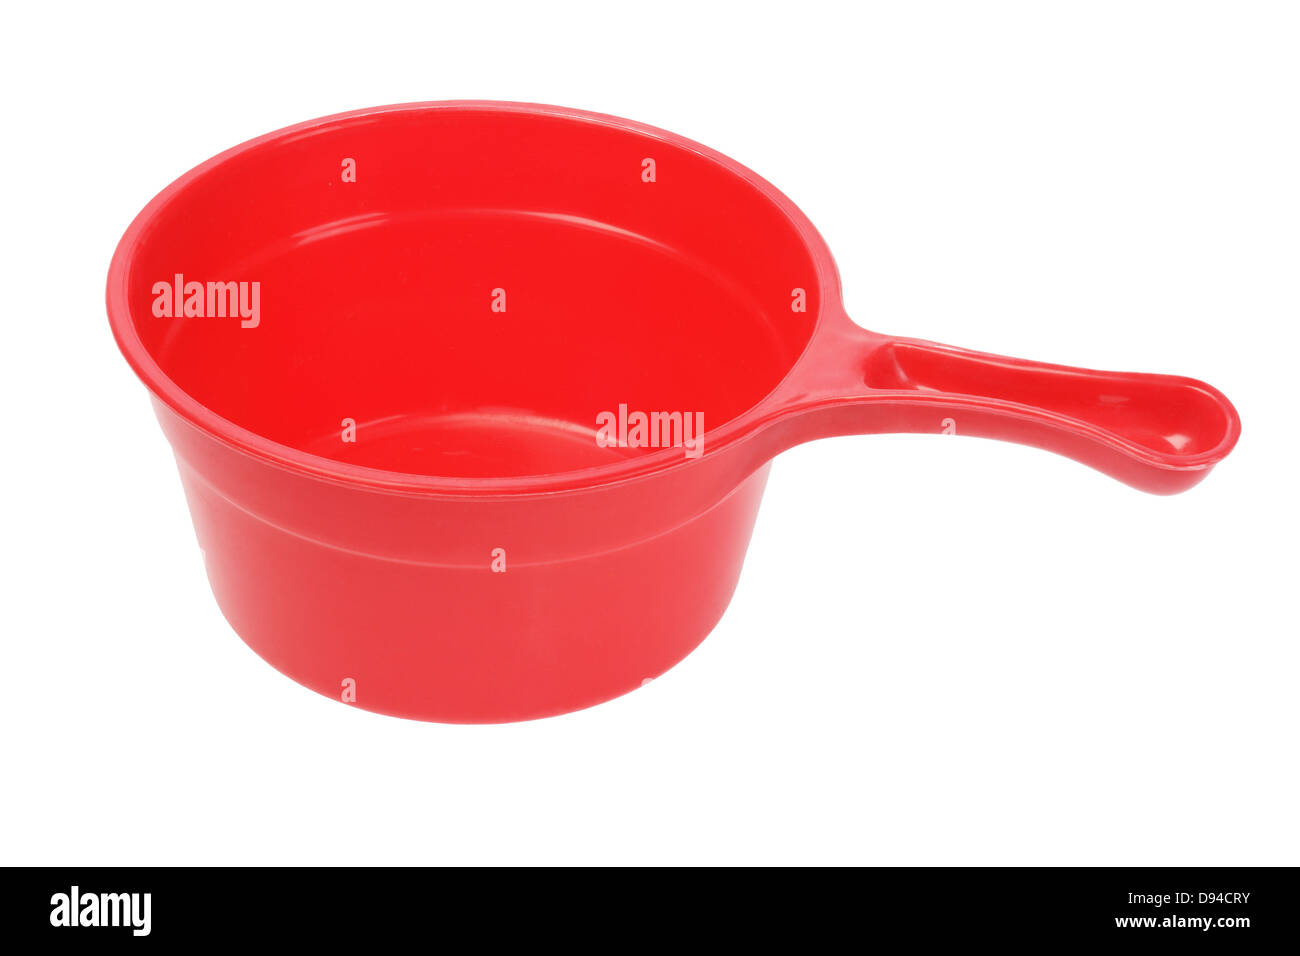 Red Plastic Scoop On White Background Stock Photo